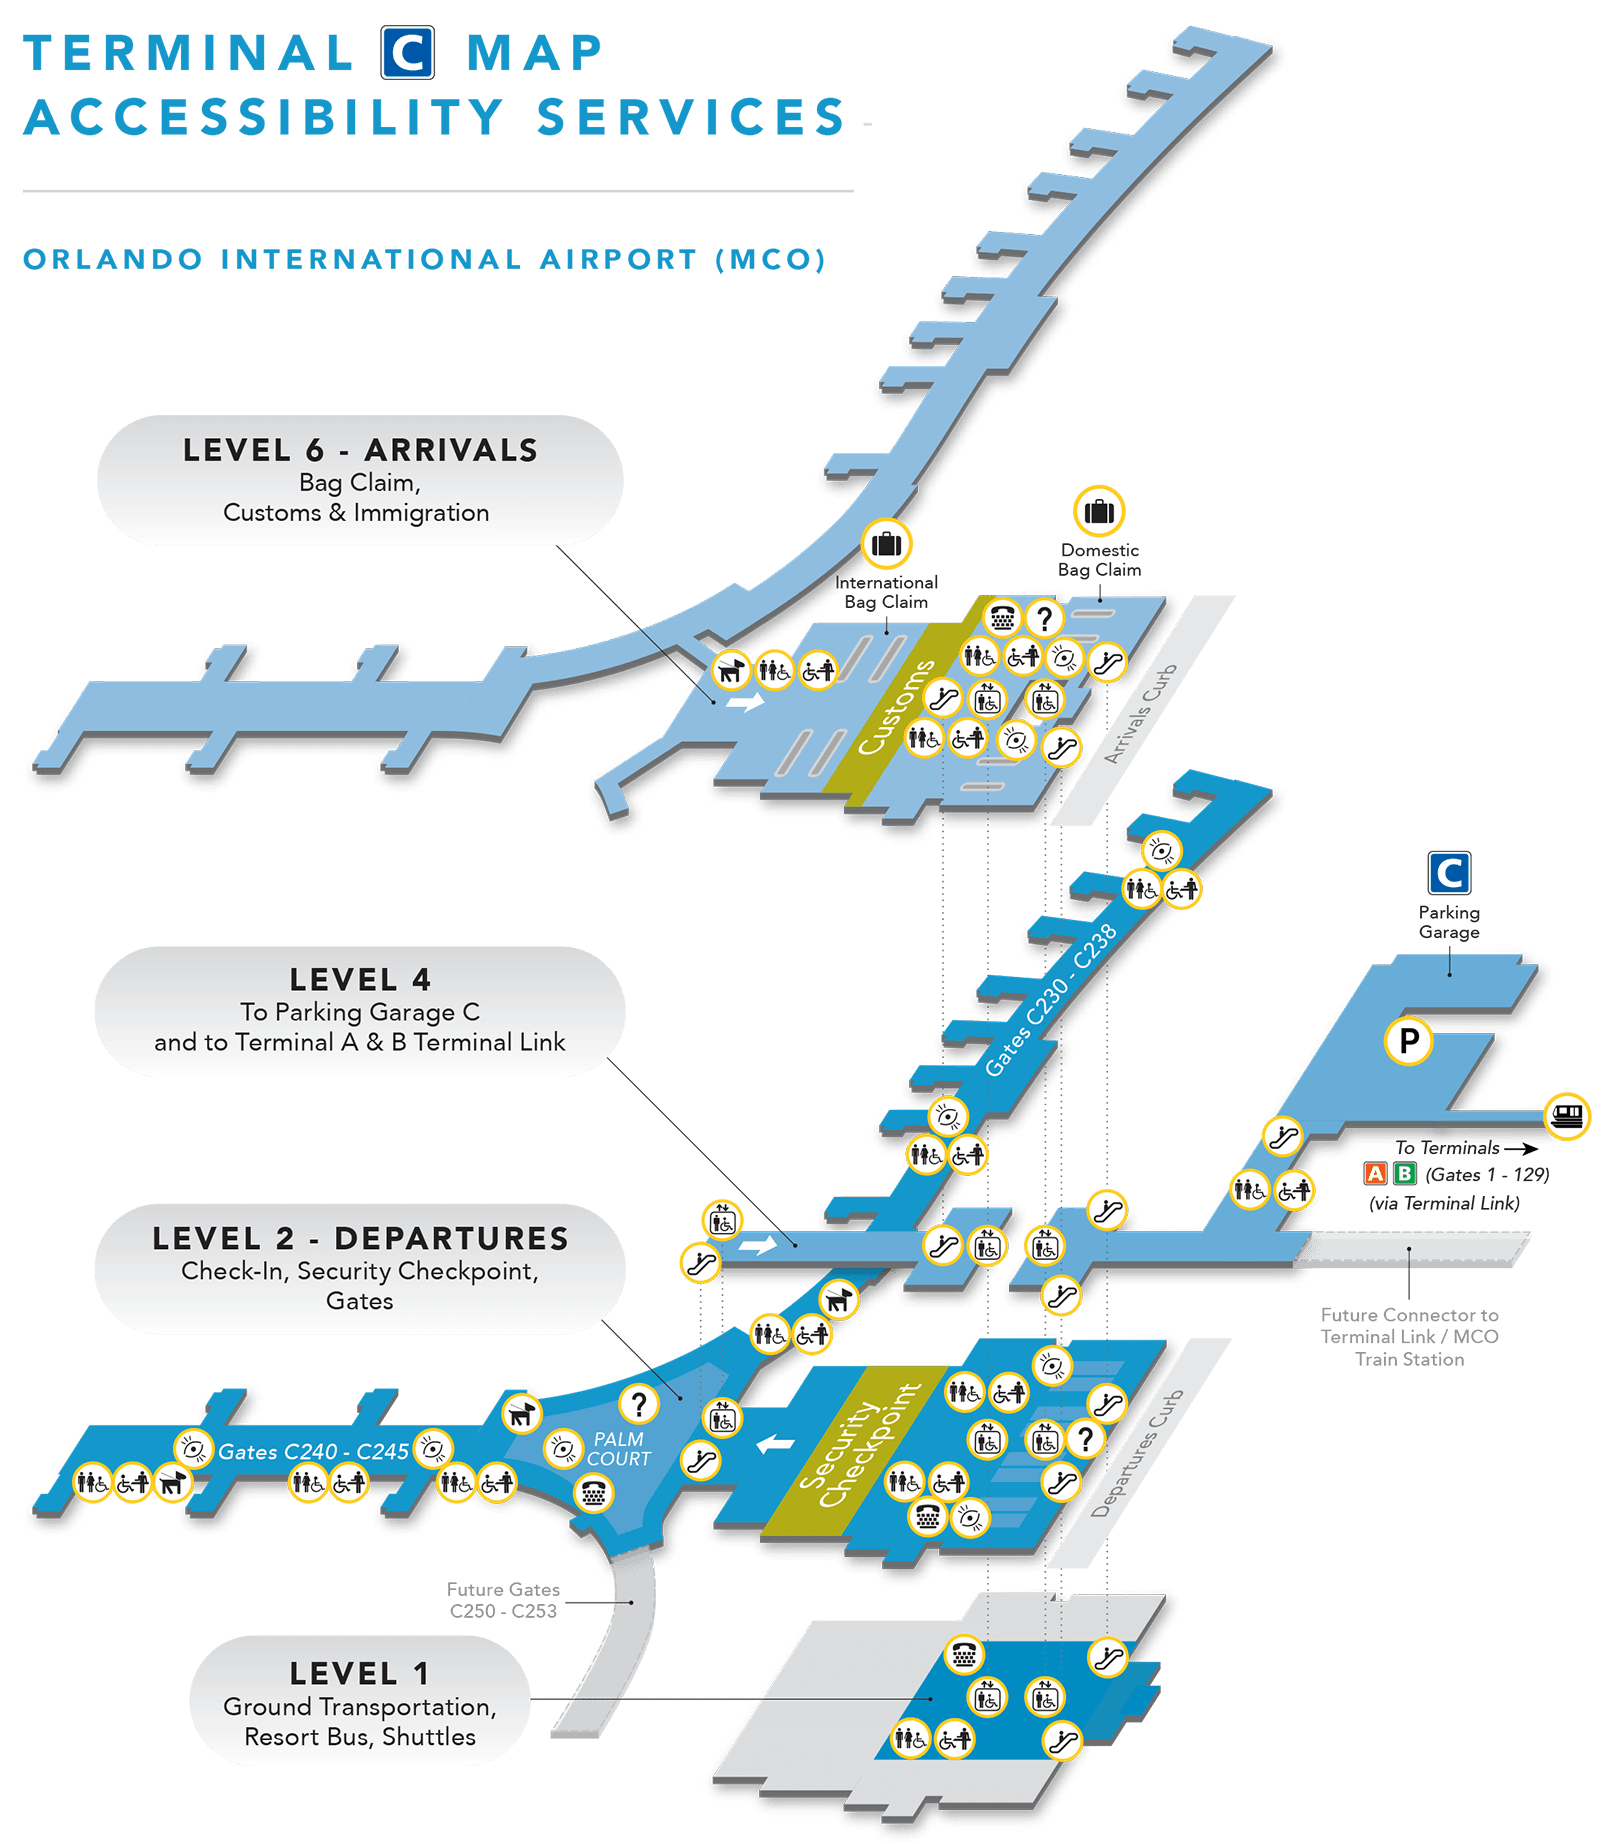 Terminal C - Accessibility Map